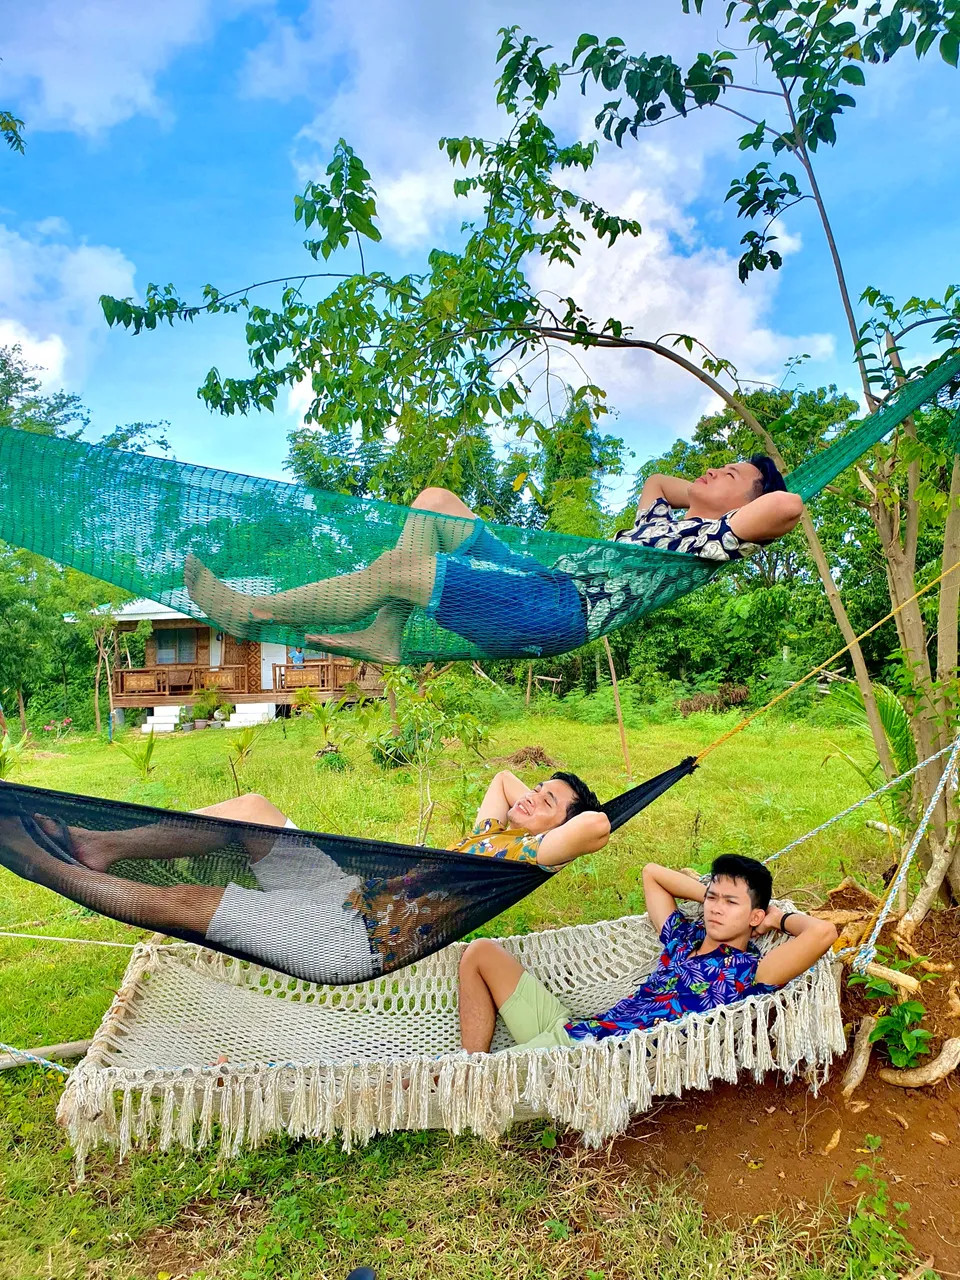 My boys and I chilling by the hammocks. Vibrant grass and vegetation encircled the entire villa.